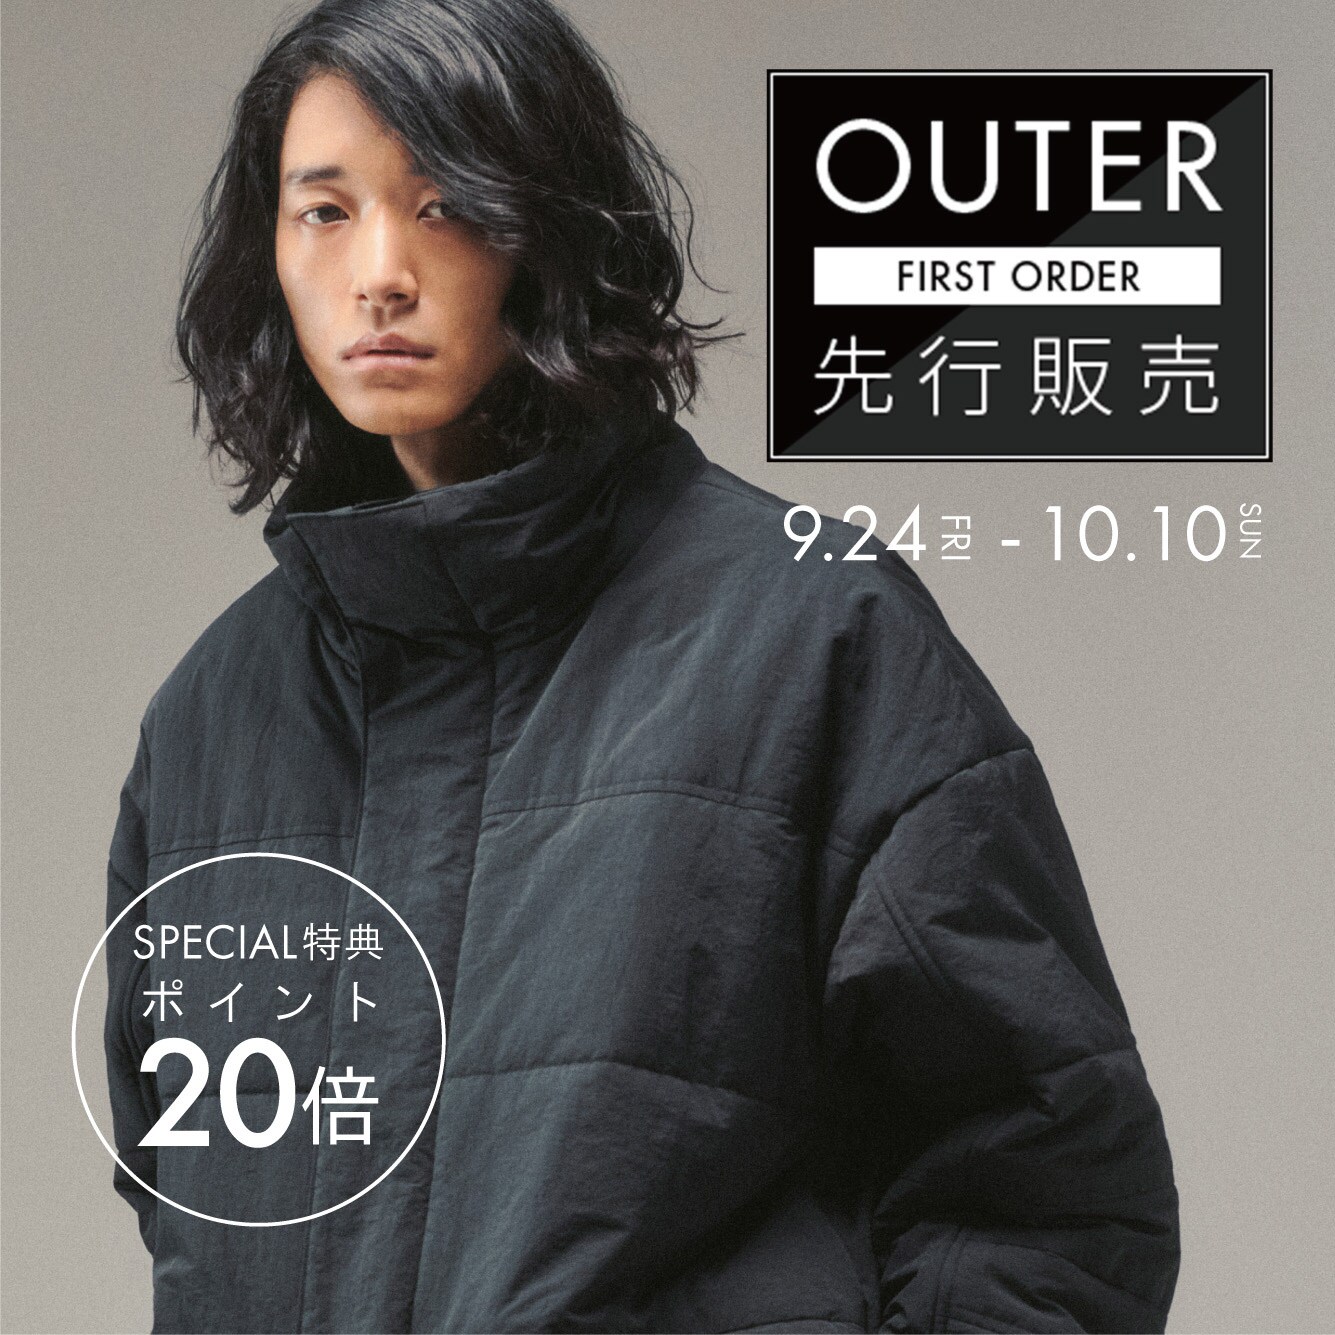 OUTER PRE ORDER